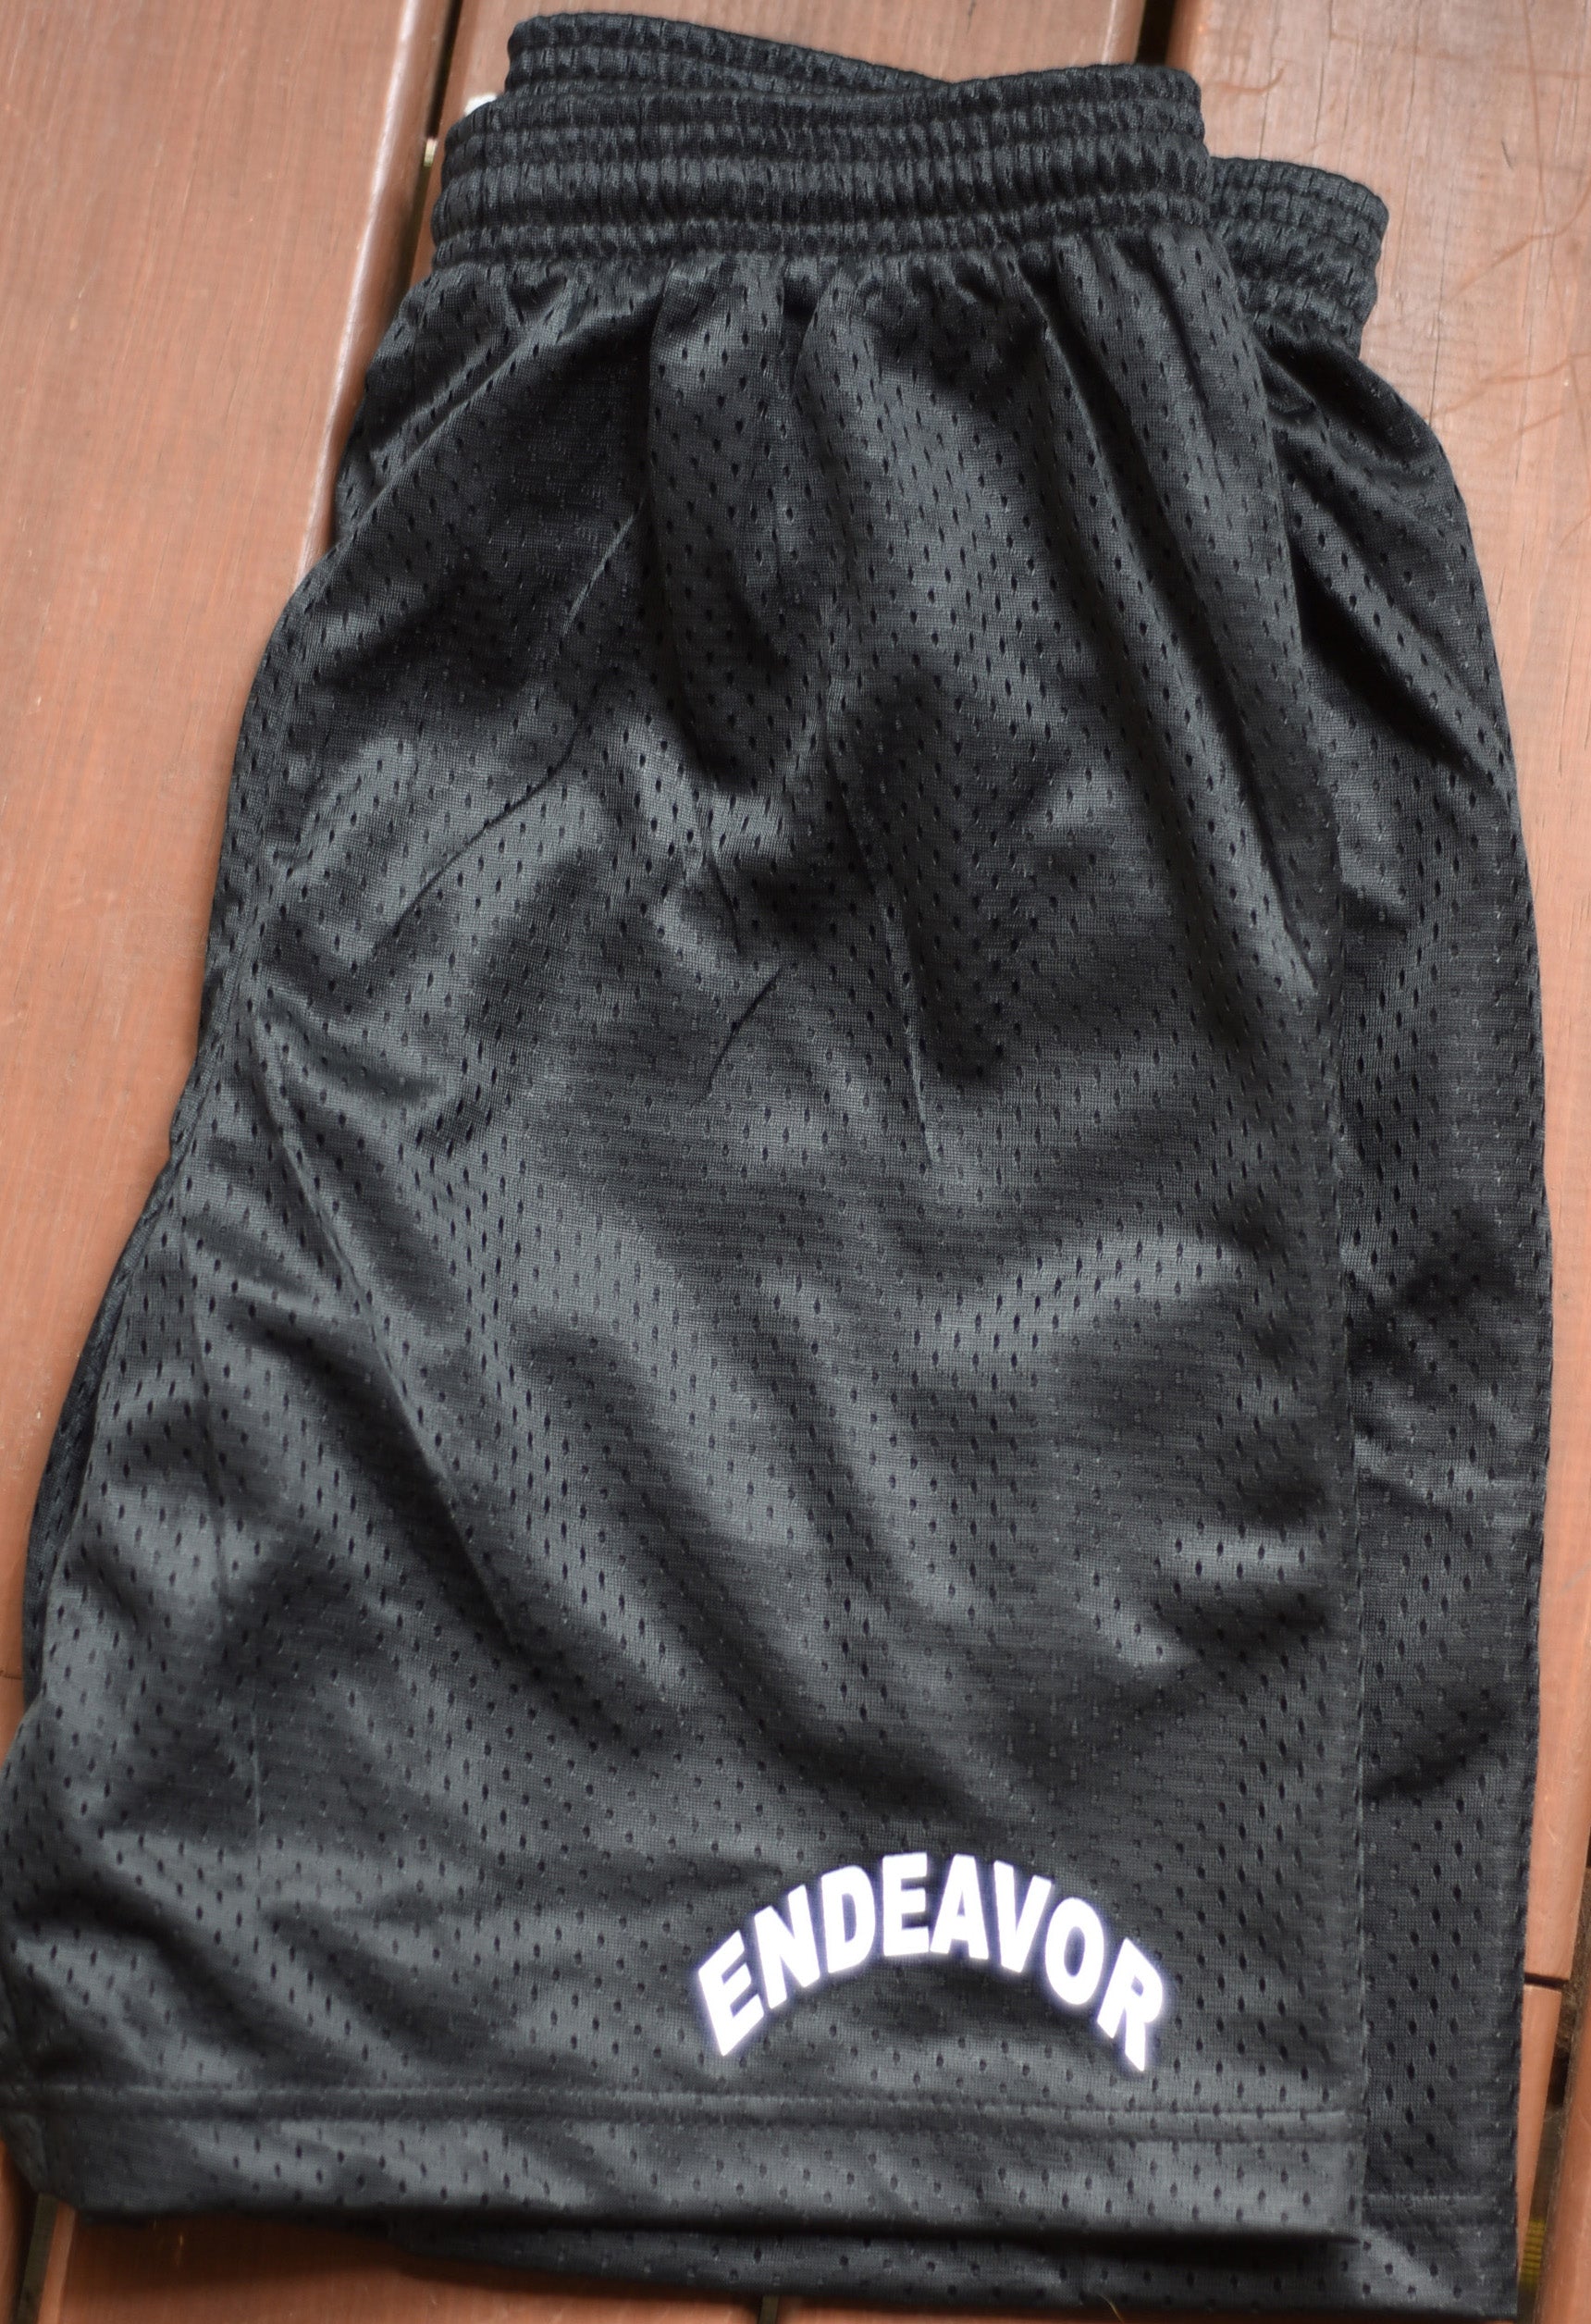 Endeavor Youth Mesh Shorts